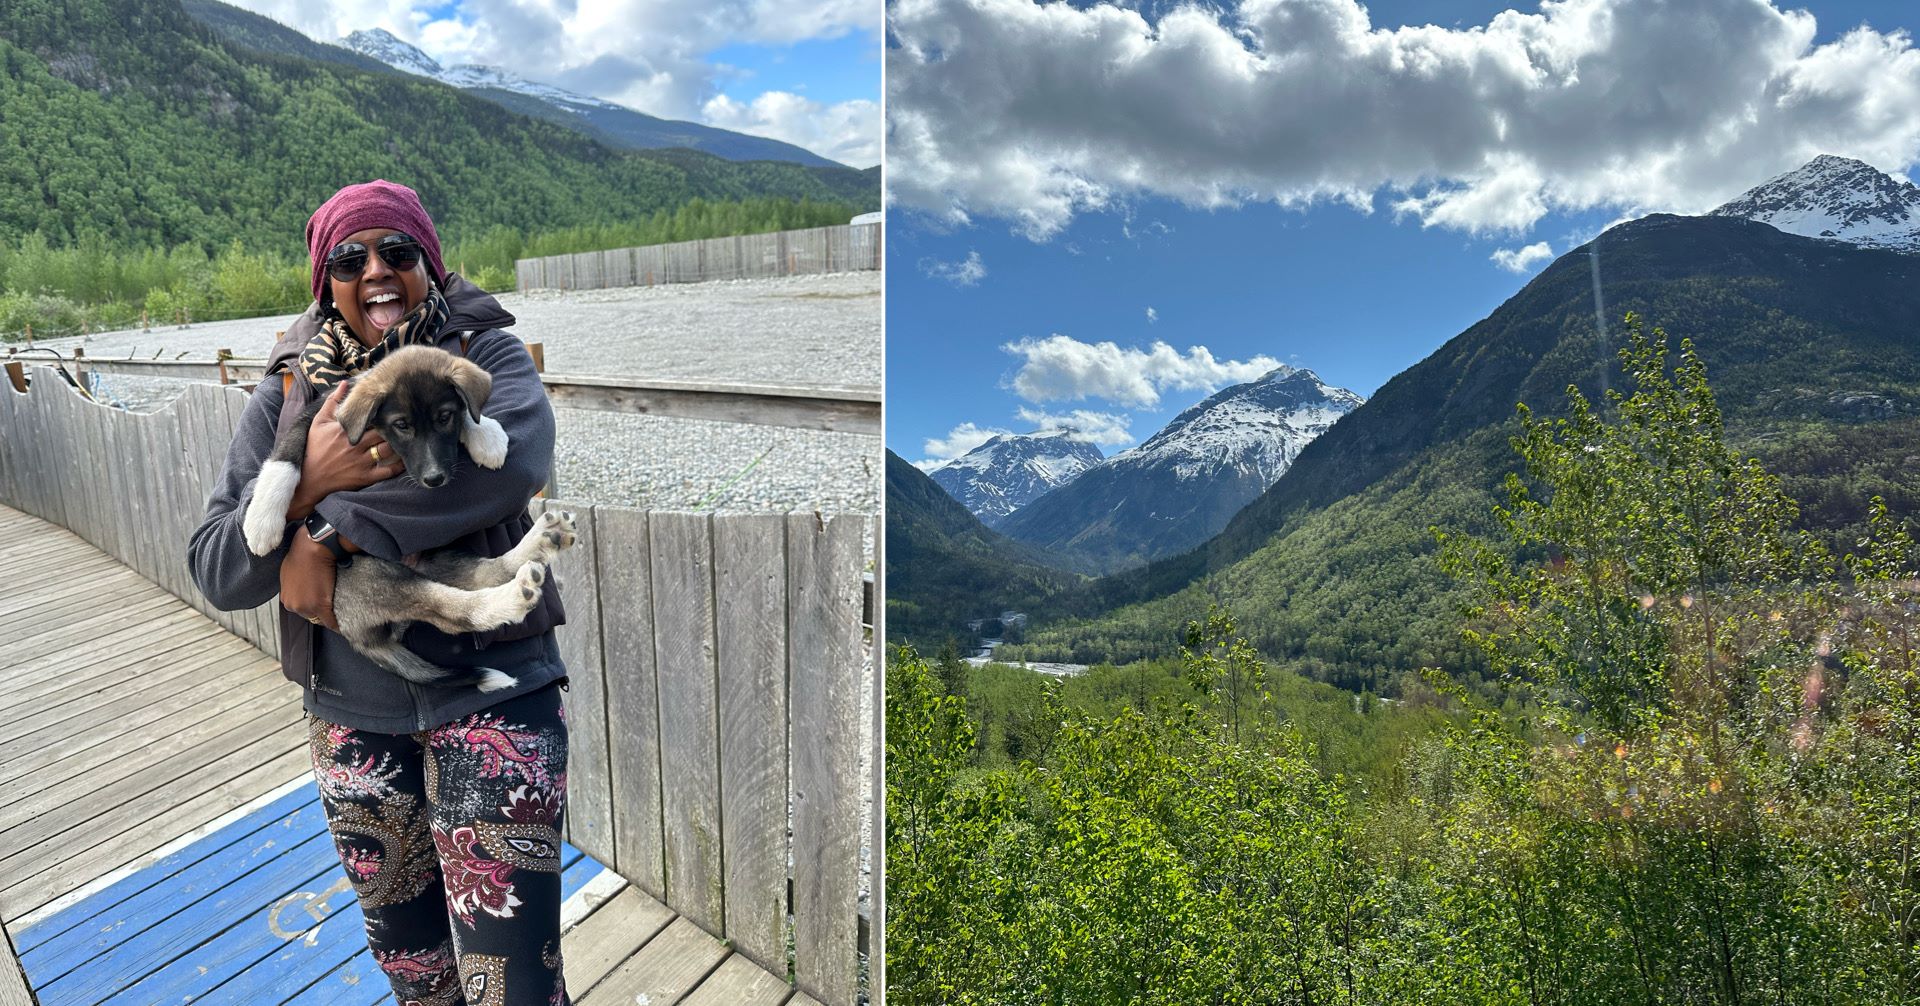 An image of Ariel holding a puppy next to a photo of lush greenery and snow-capped mountains in the background.